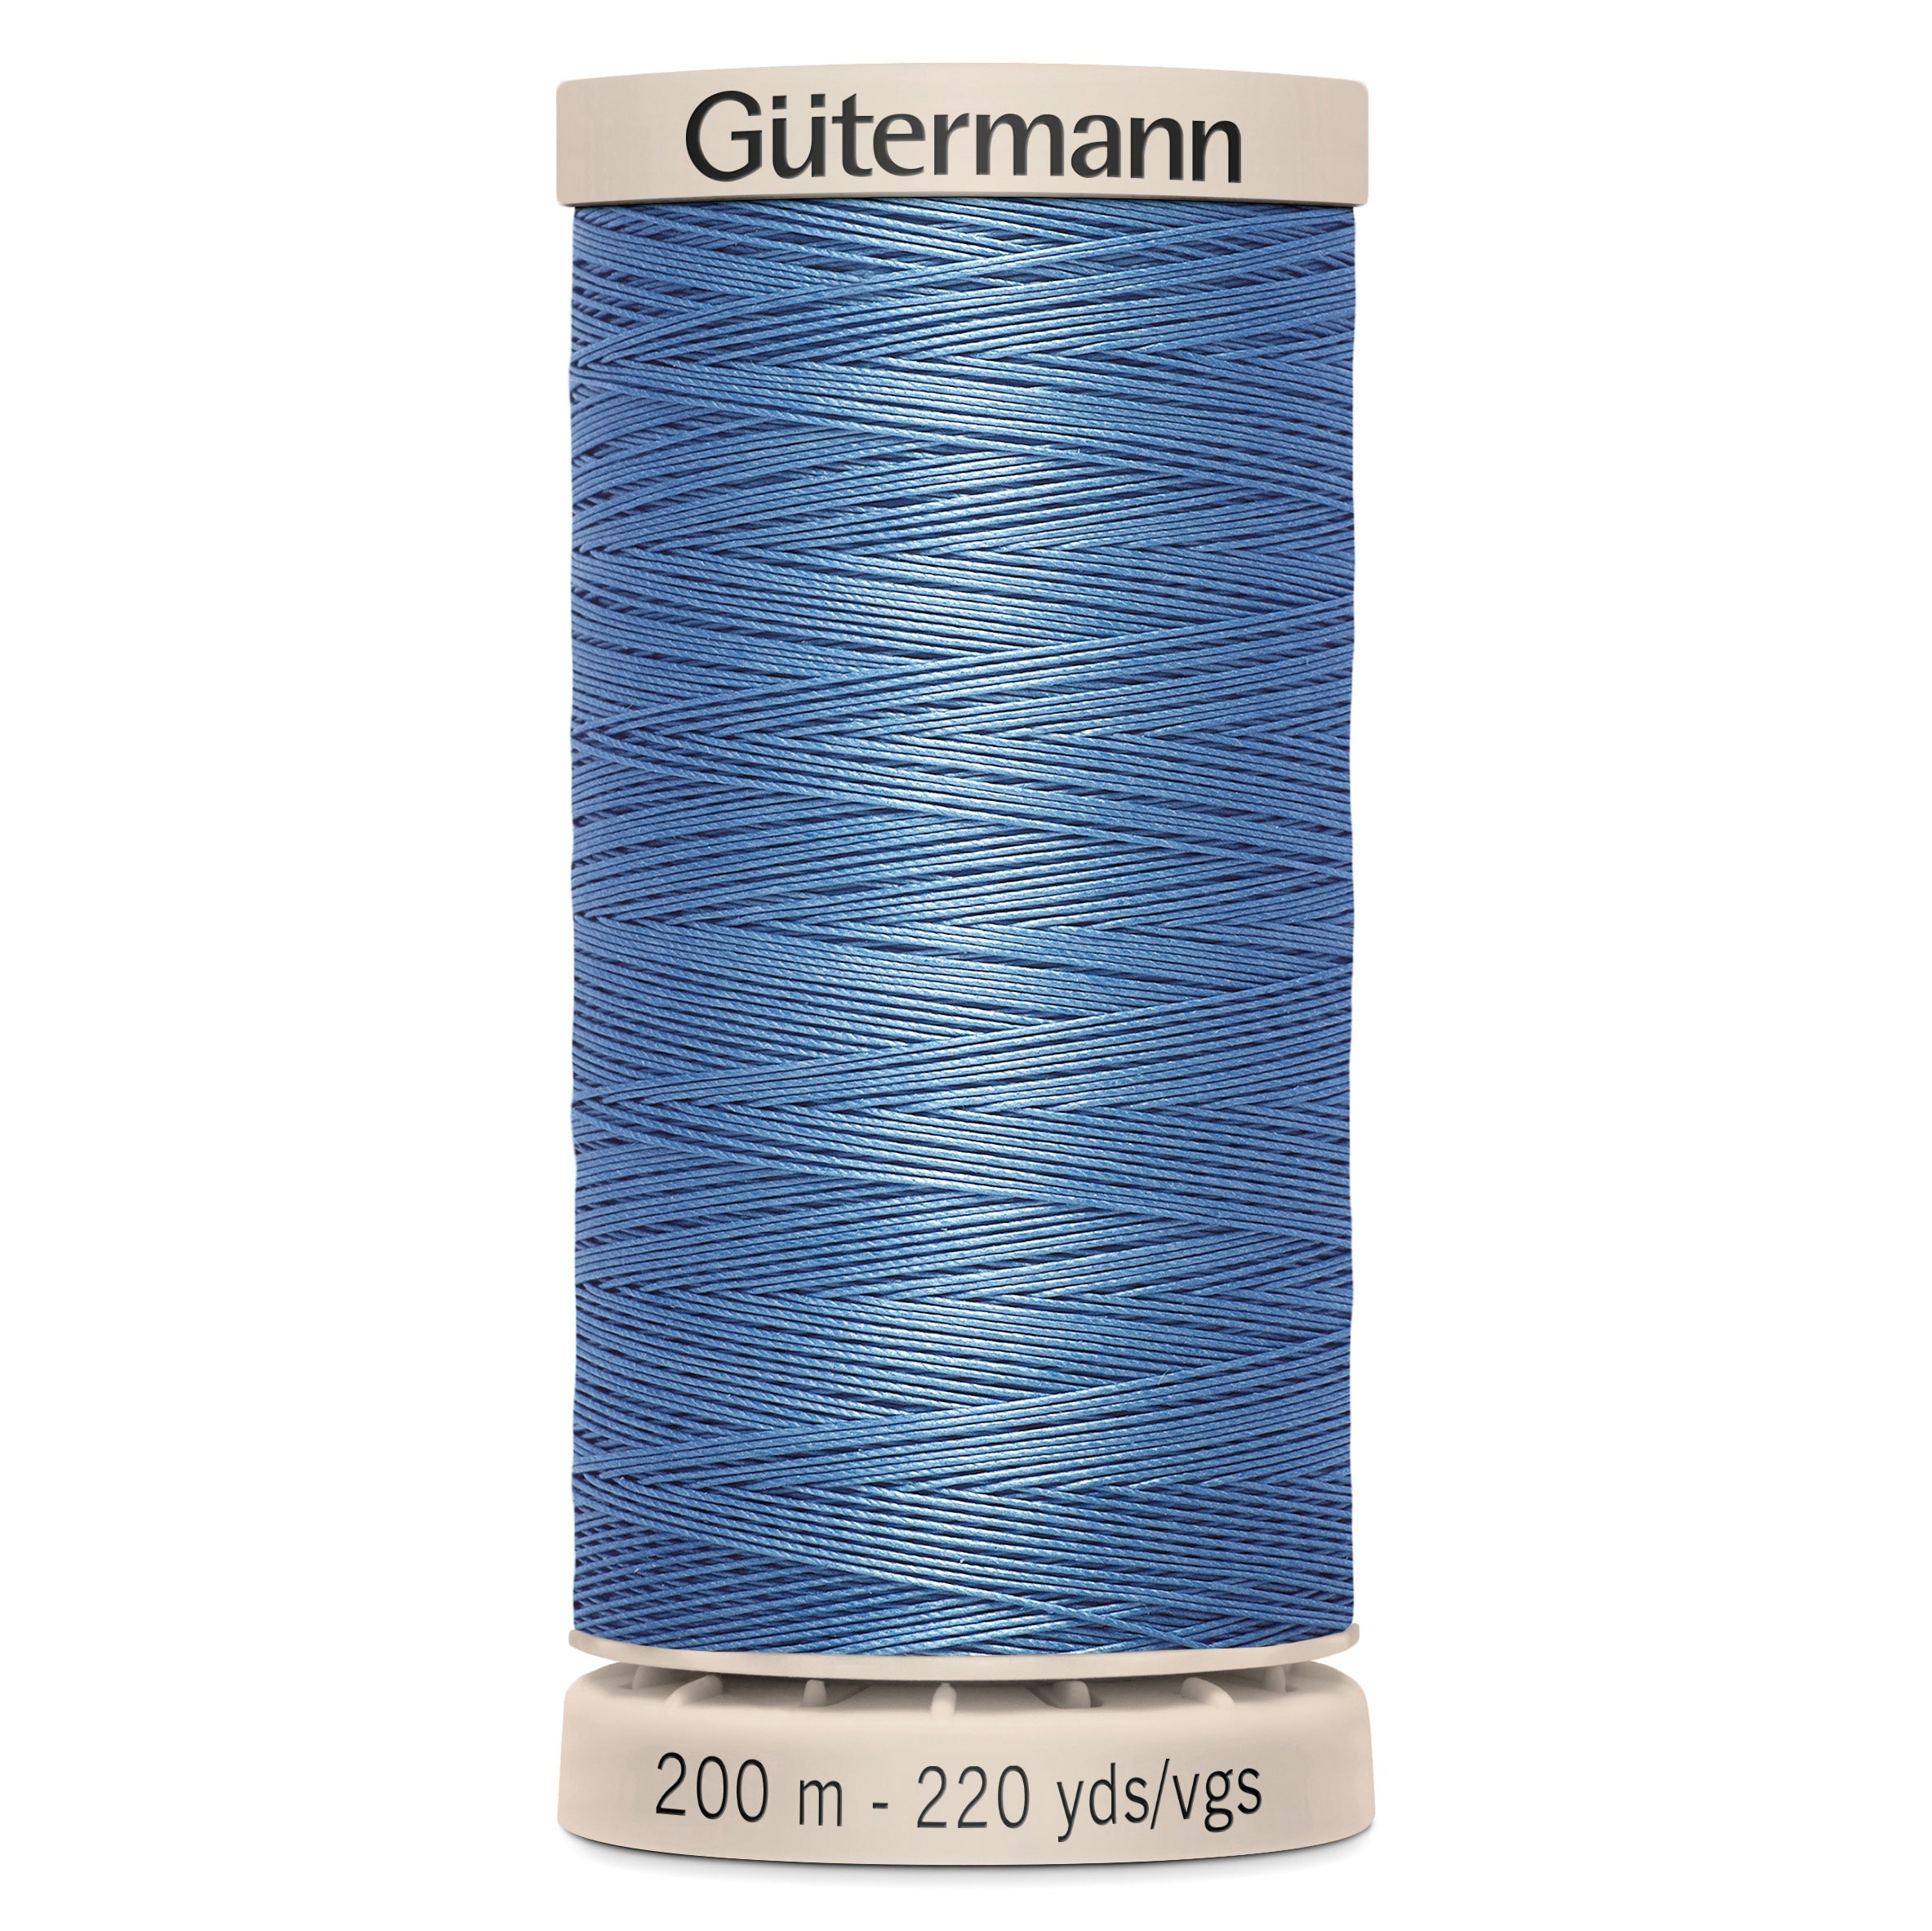 Gutermann Hand Quilting Cotton - 5725 from Jaycotts Sewing Supplies